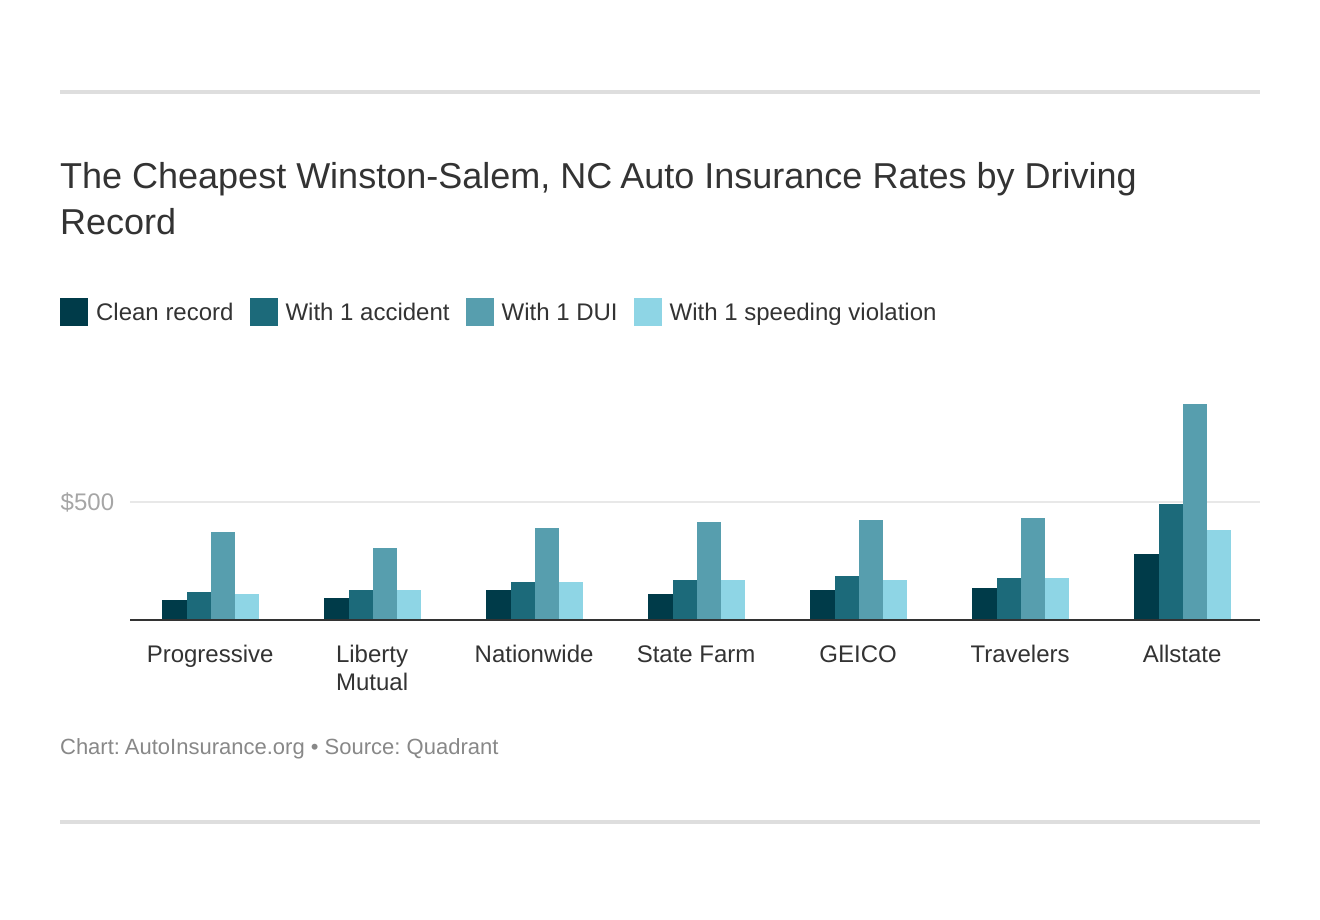 The Cheapest Winston-Salem, NC Auto Insurance Rates by Driving Record